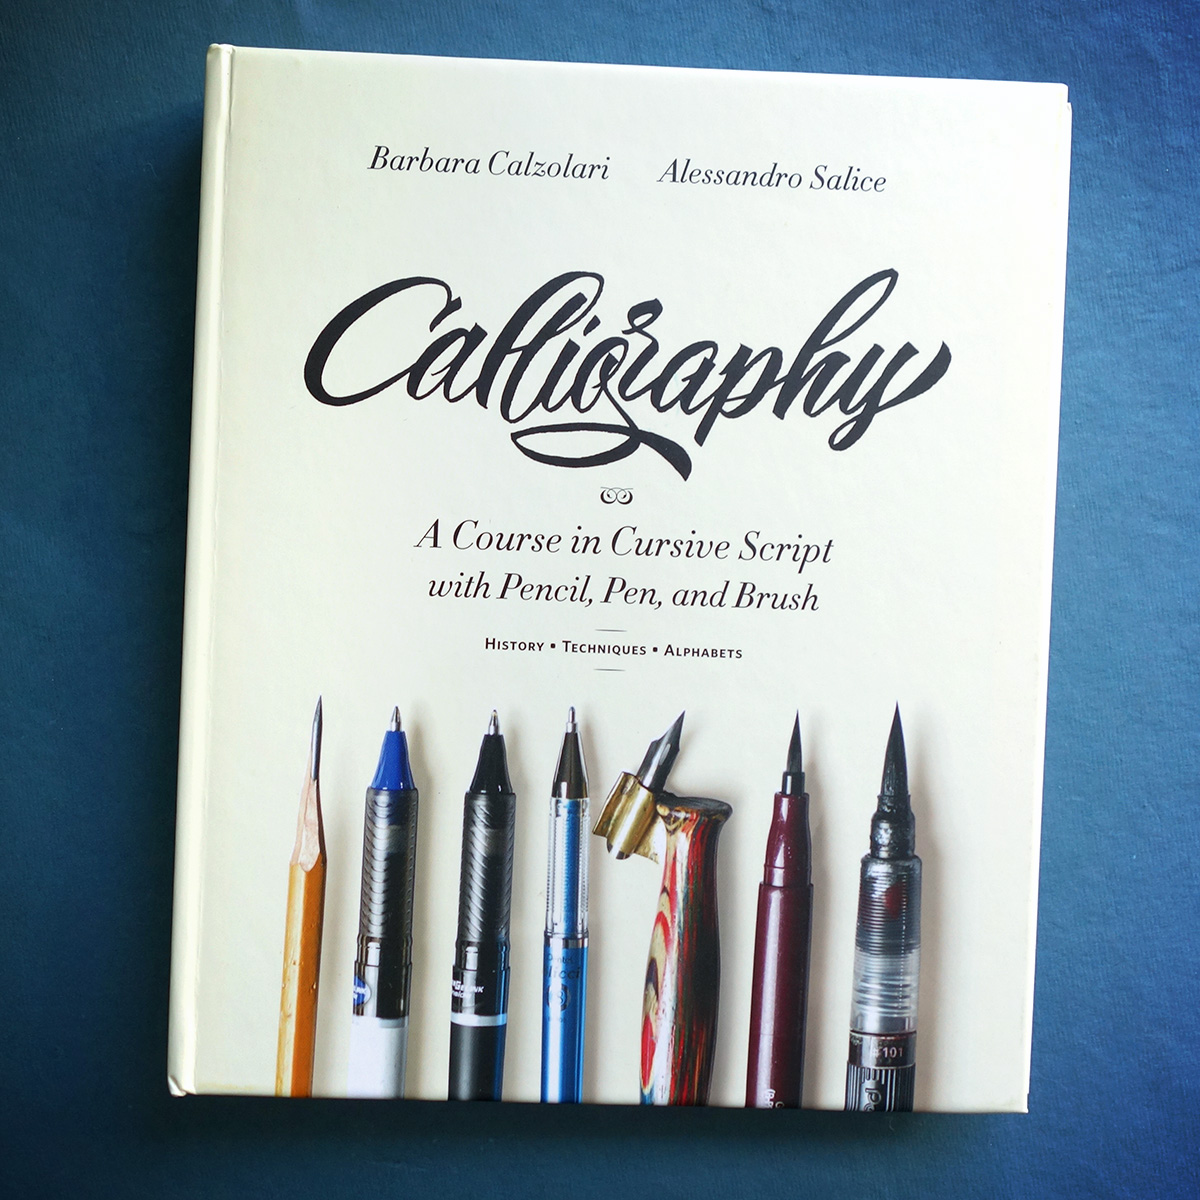 Calligraphy book cover